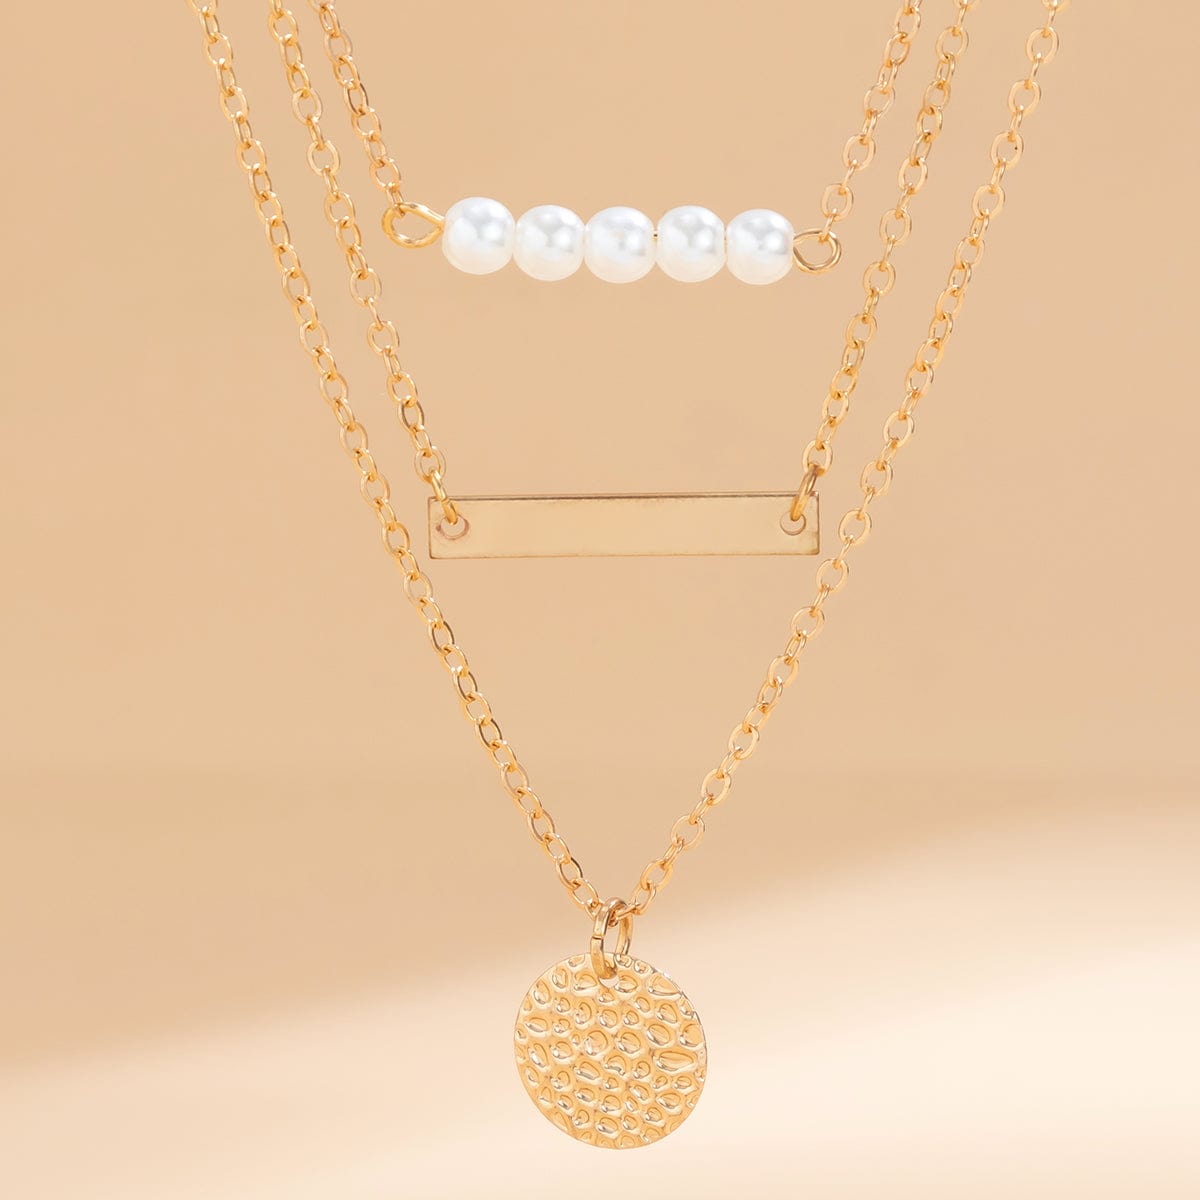 Chic Layered Round Disk Metal Bar Pearl Pendant Cable Chain Necklace Set - ArtGalleryZen